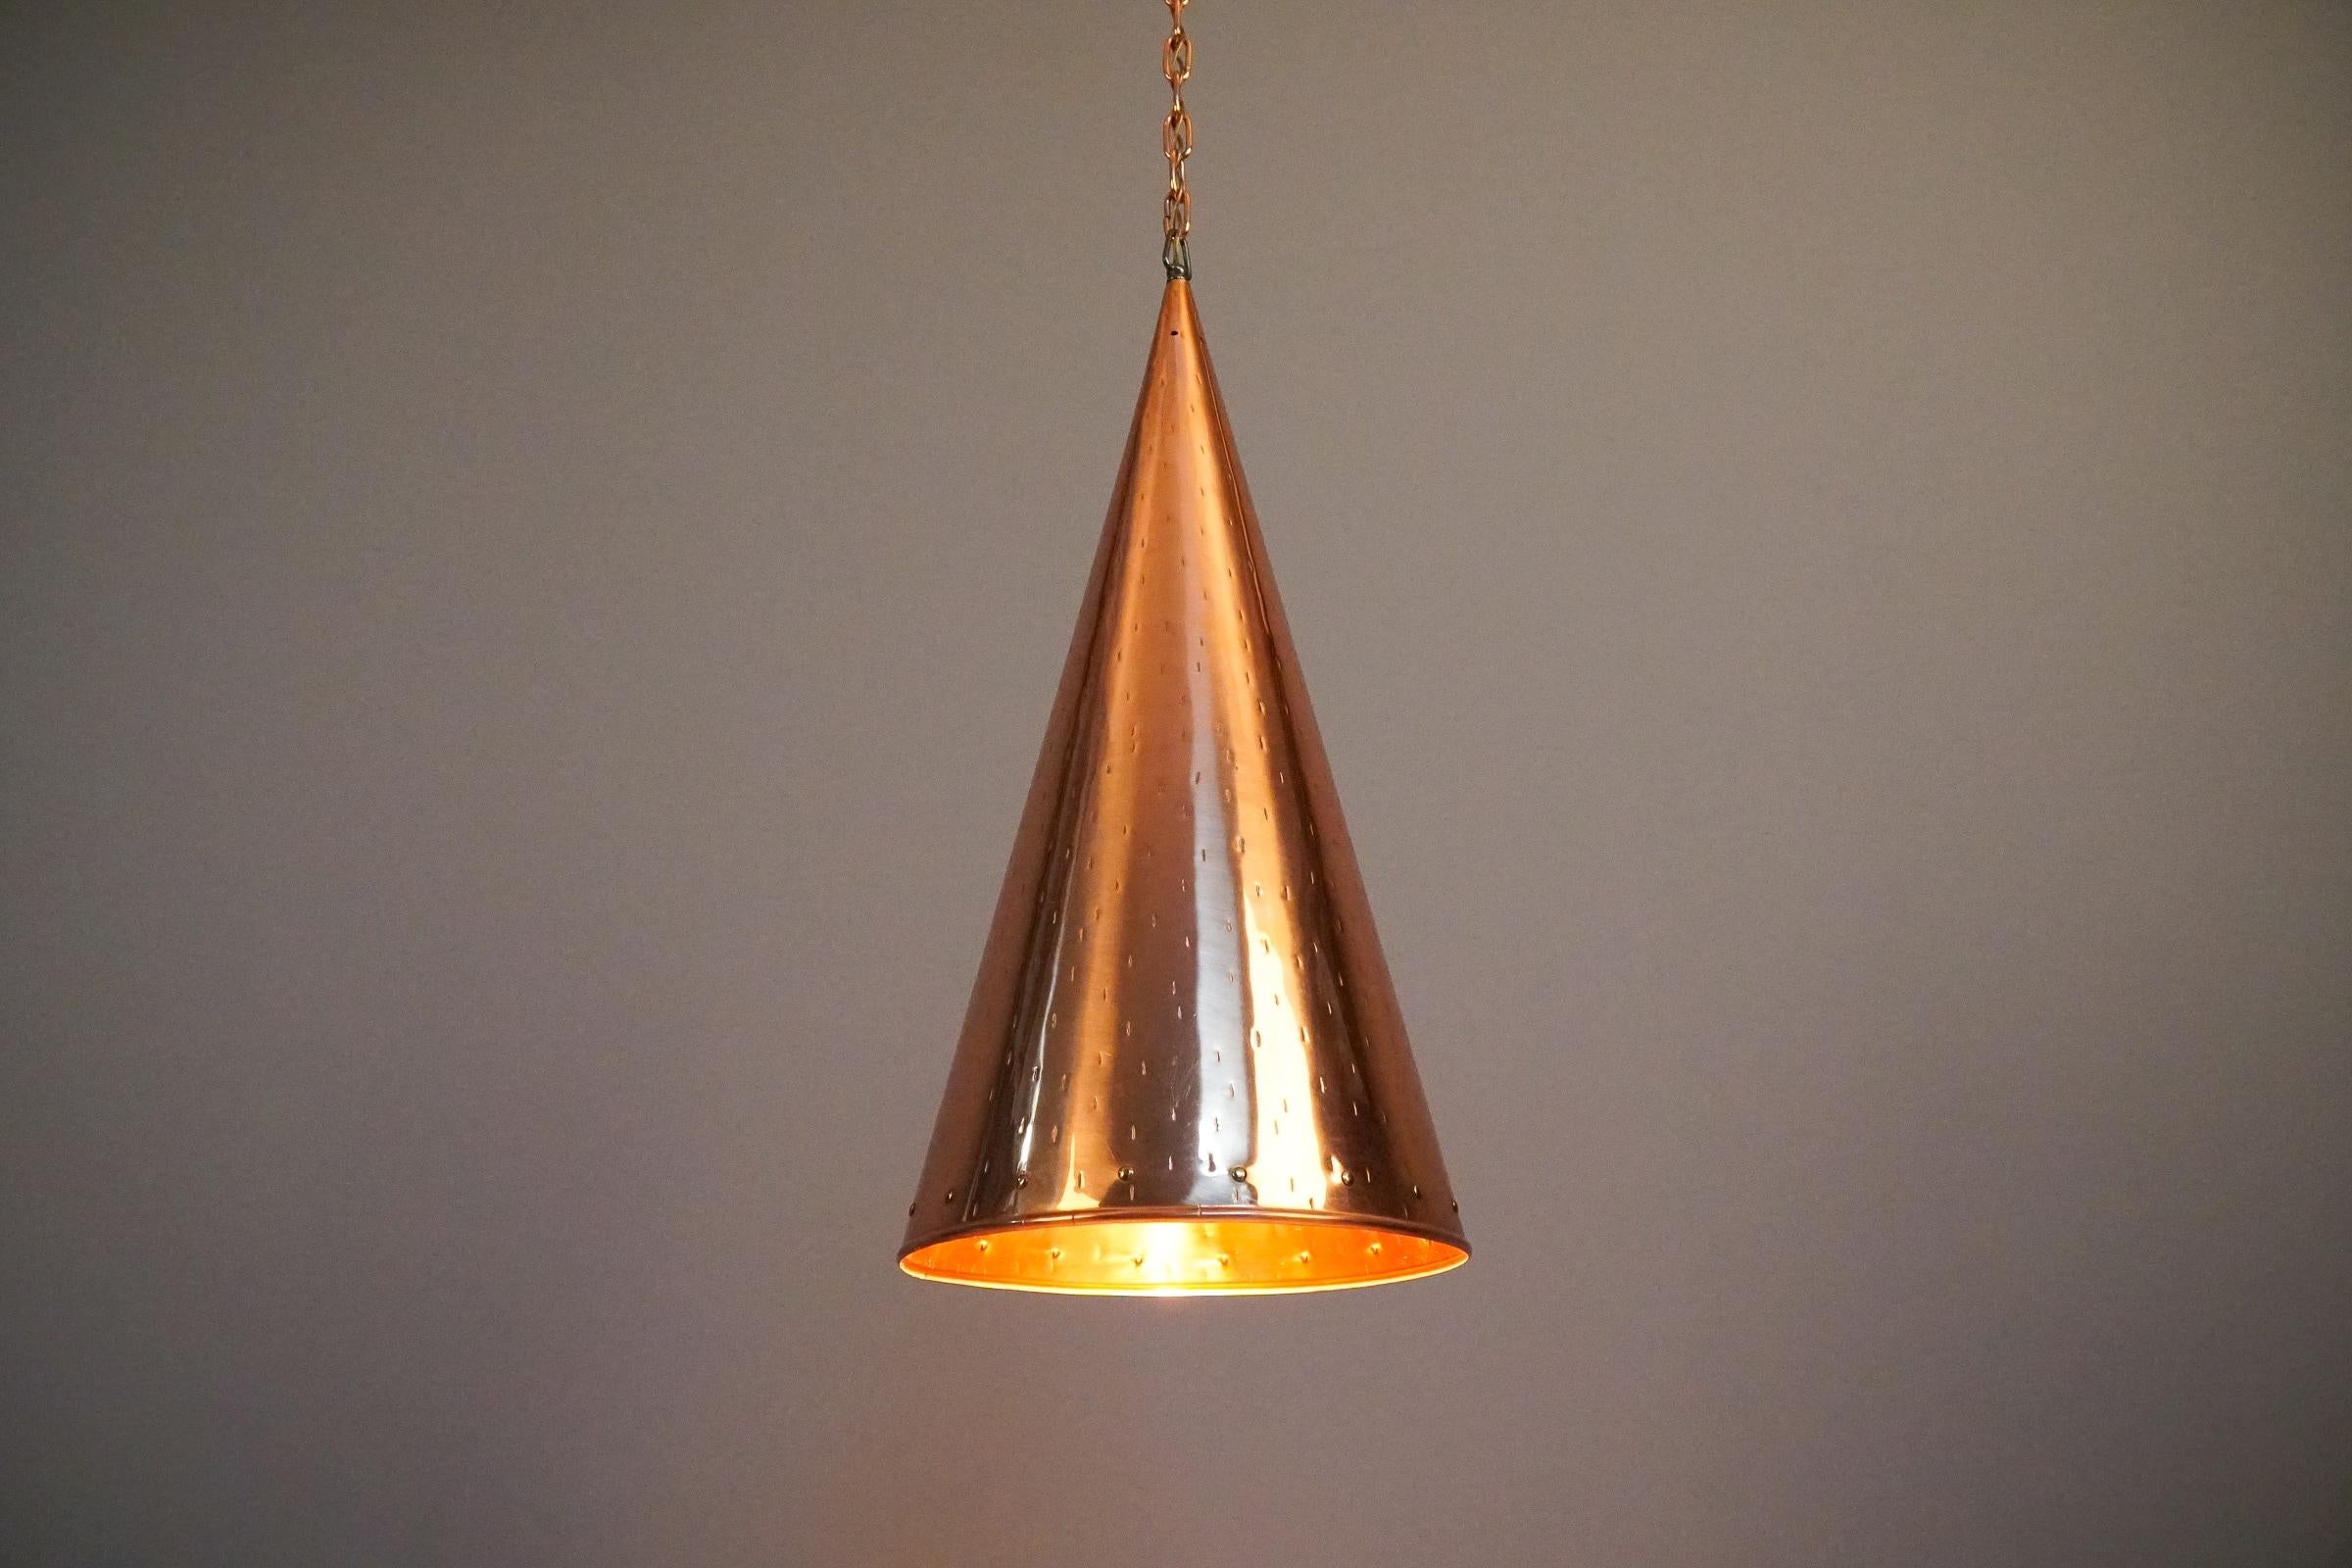 Mid-20th Century Hammered Copper Cone Pendant Lamps by E.S Horn Aalestrup, 1950s Denmark For Sale